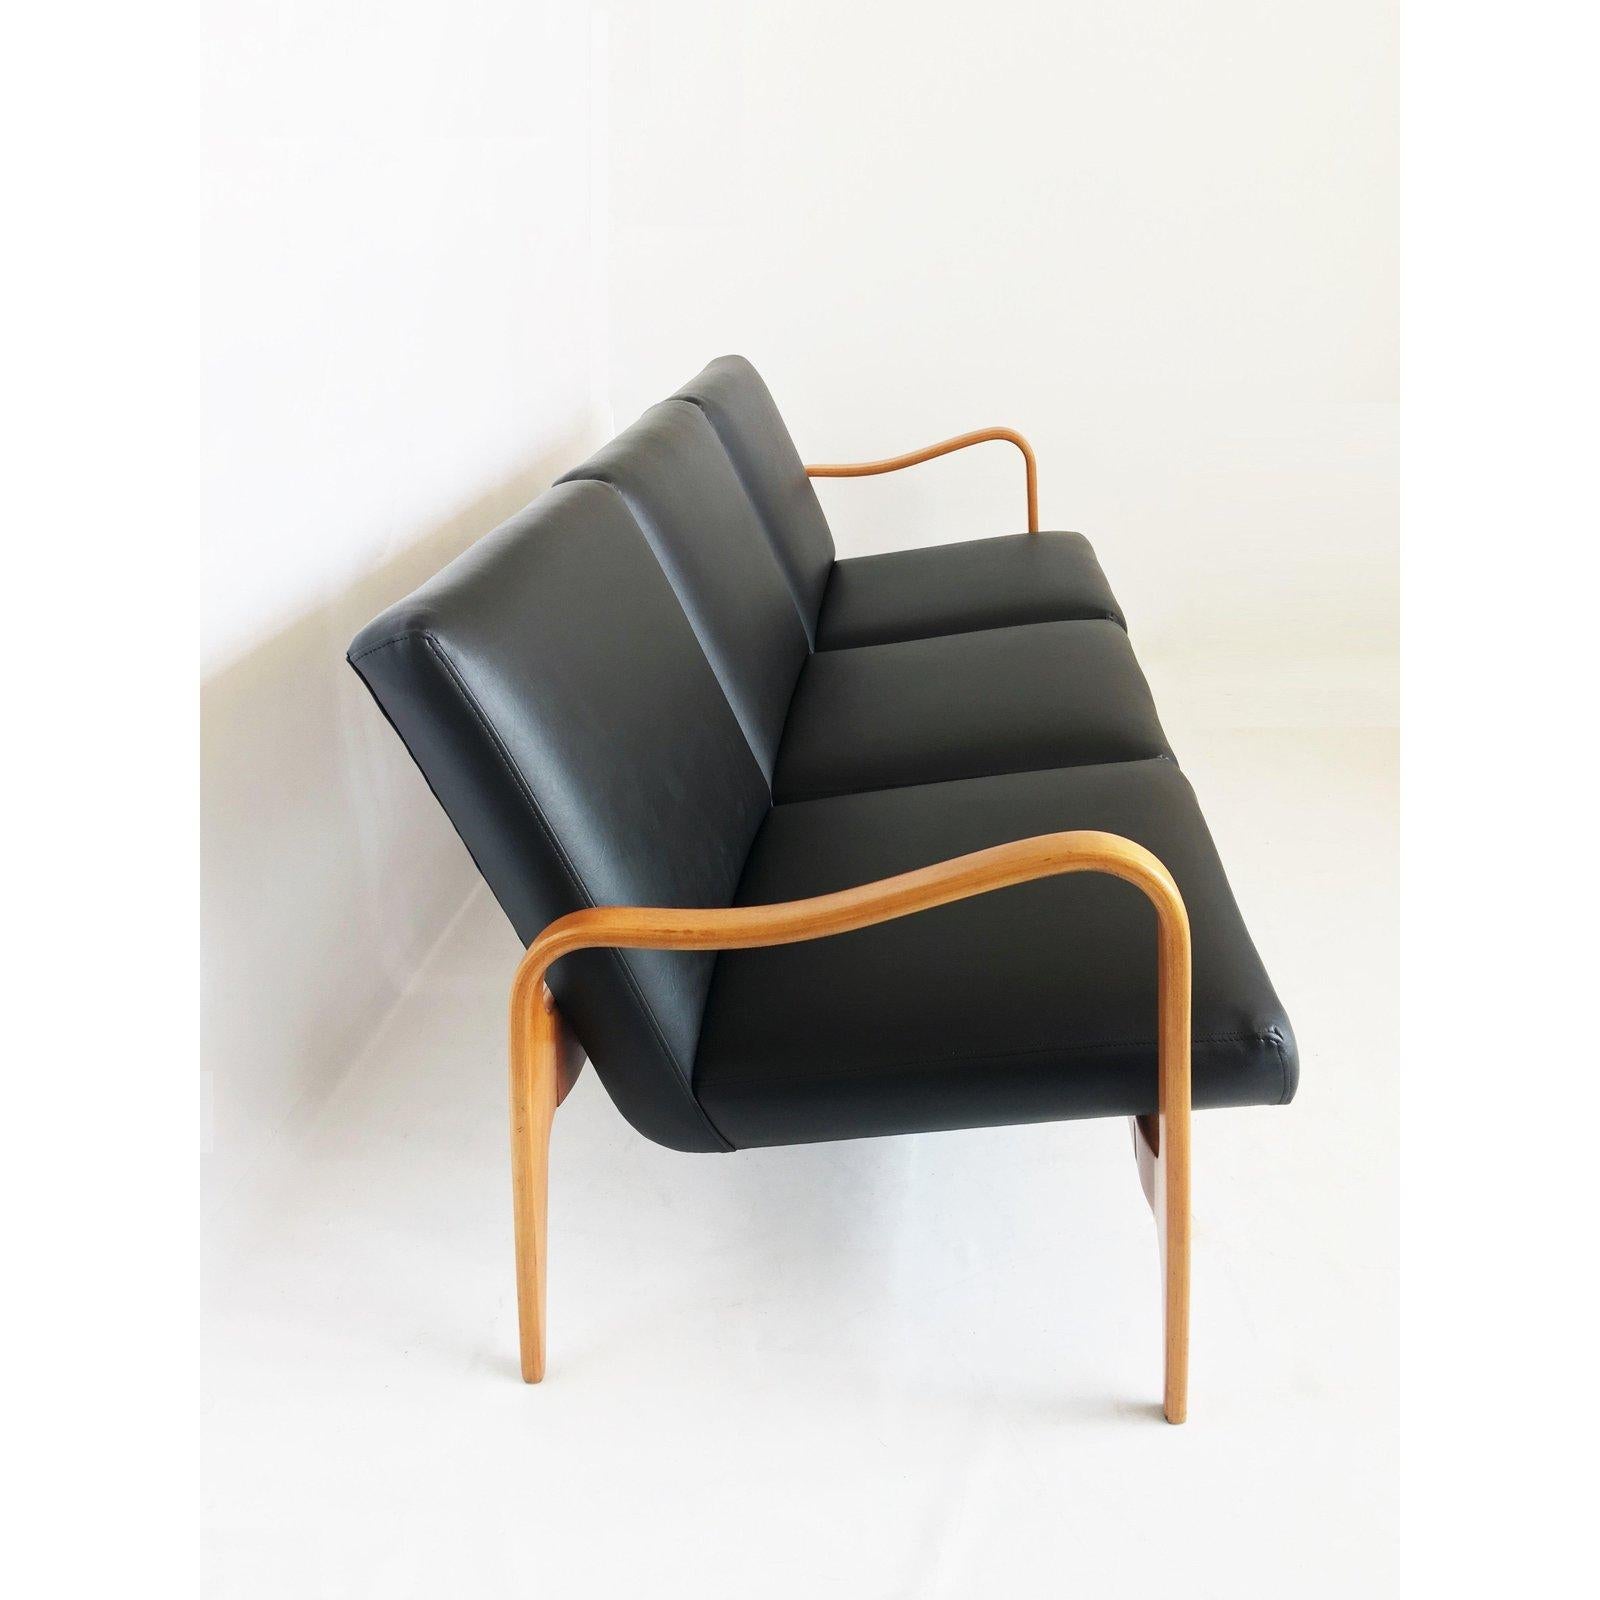 Mid-20th Century Modernist Thonet Sculpted Bentwood Sofa For Sale